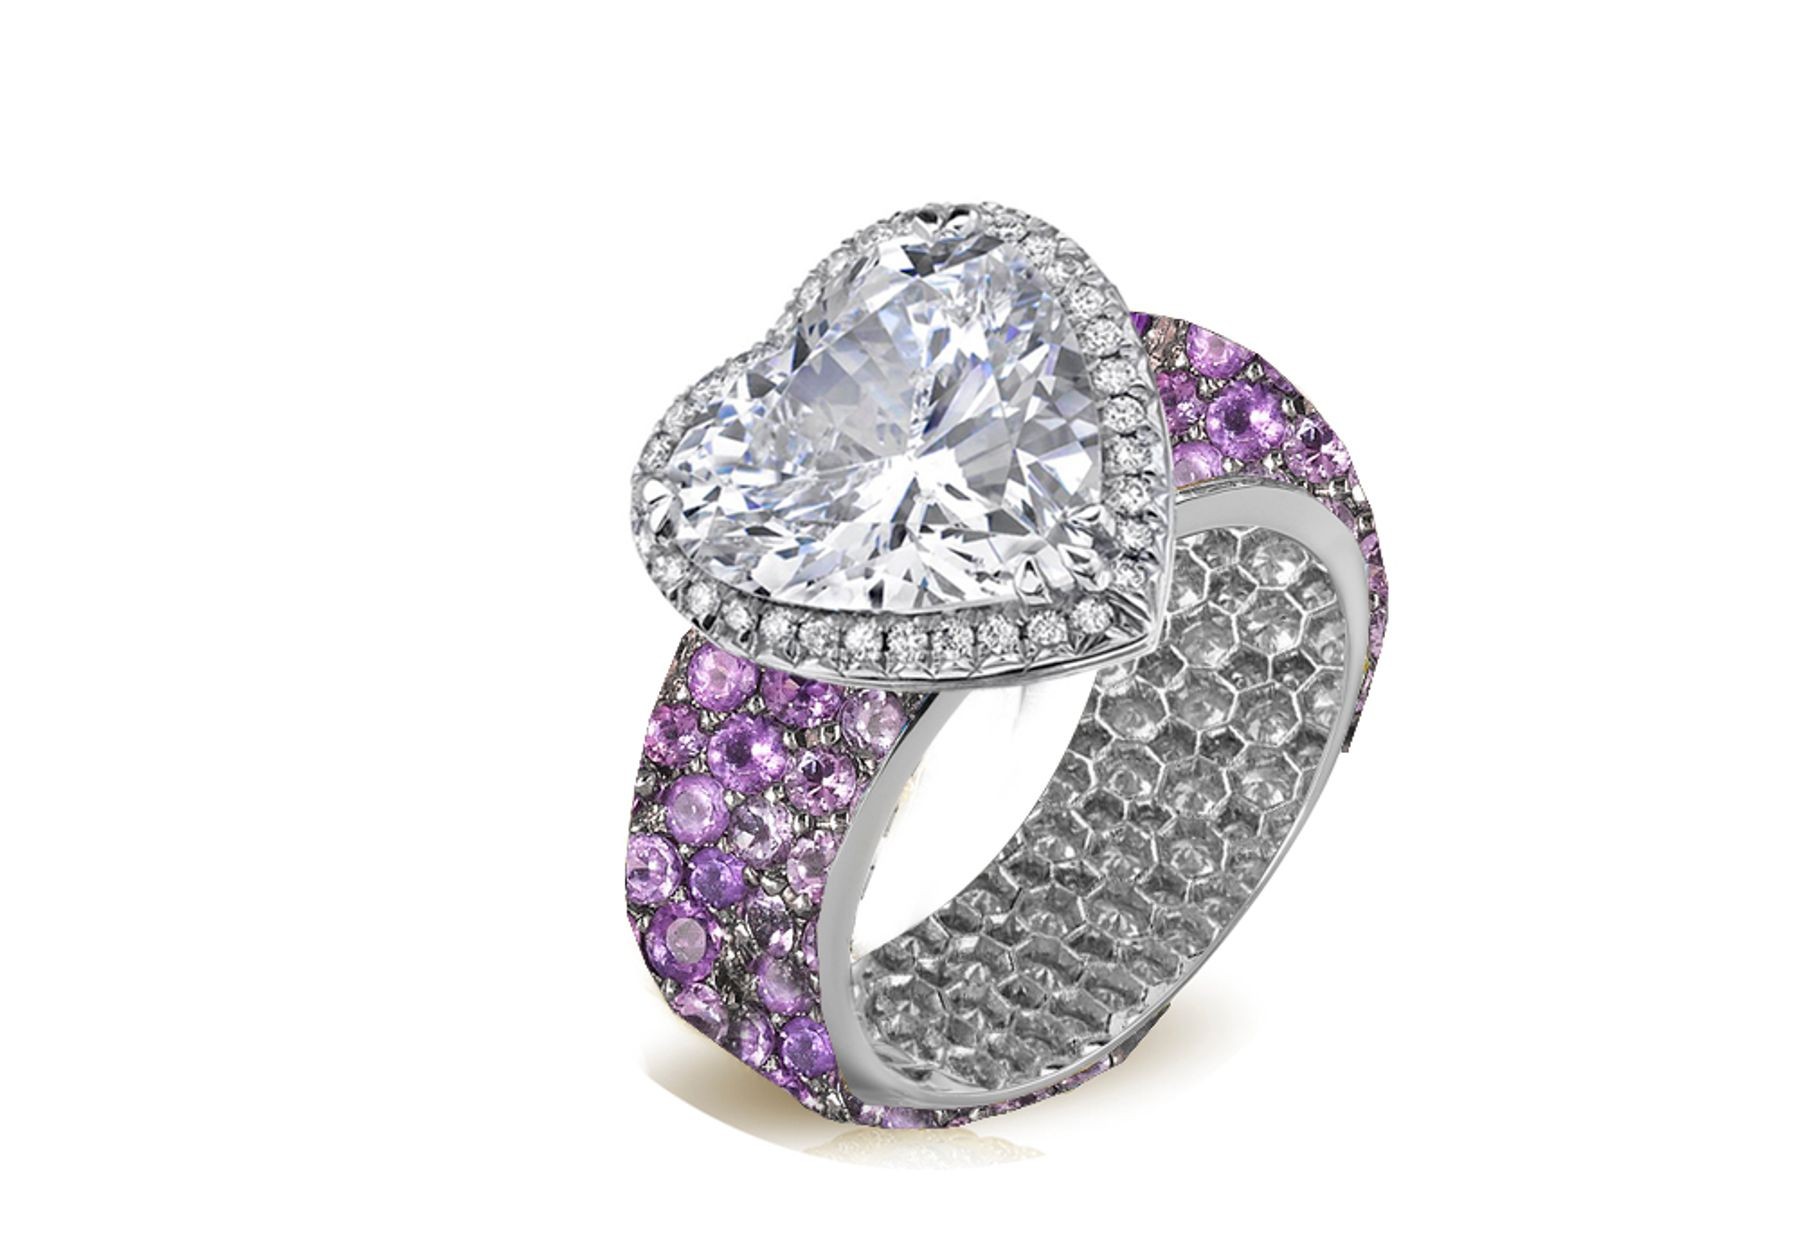 Halo Heart Diamond Ring with Diamonds & Purple Sapphires in Gold or Platinum